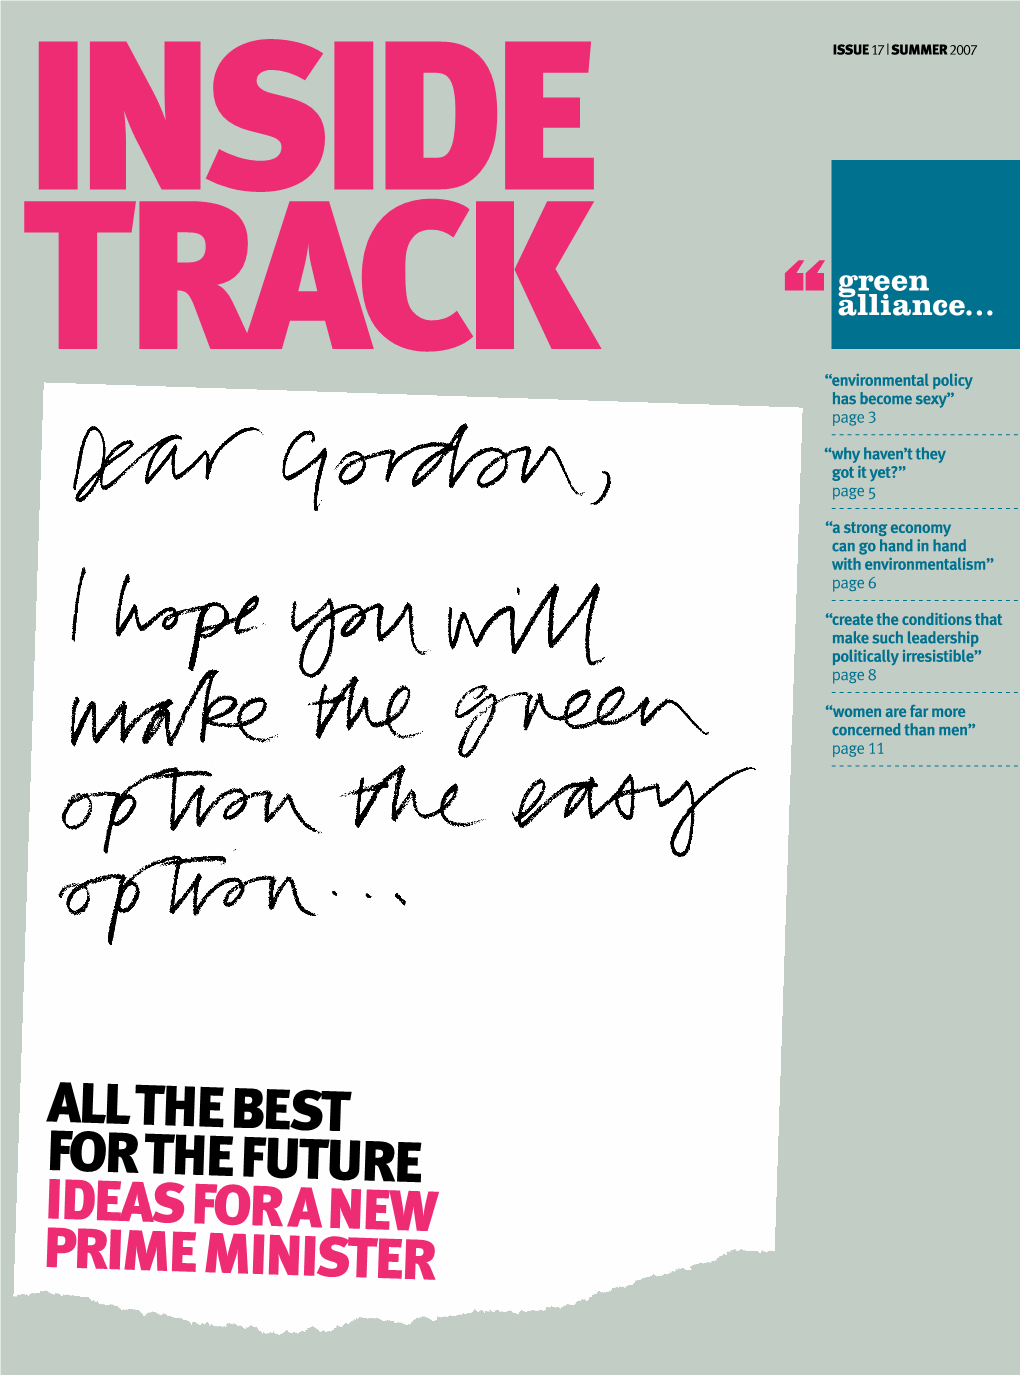 The Best for the Future Ideas for a New Prime Minister   Issue 17 | Summer 2007 Issue 17 | Summer 2007